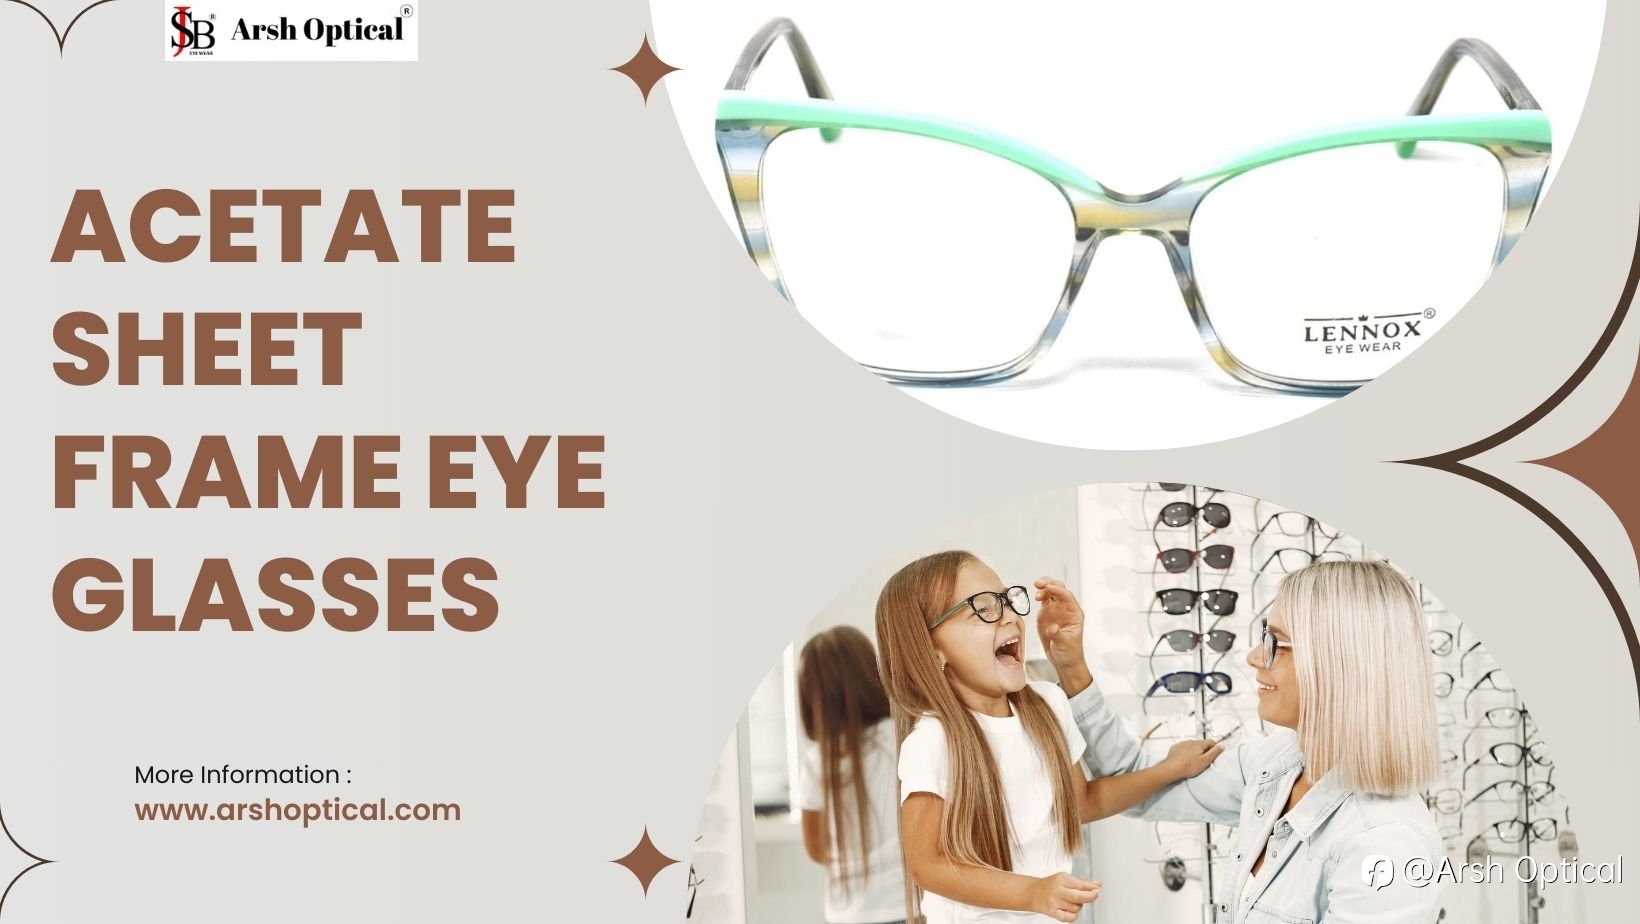 Check Out Our Latest Collection of Acetate Sheet Frames for Men and Women